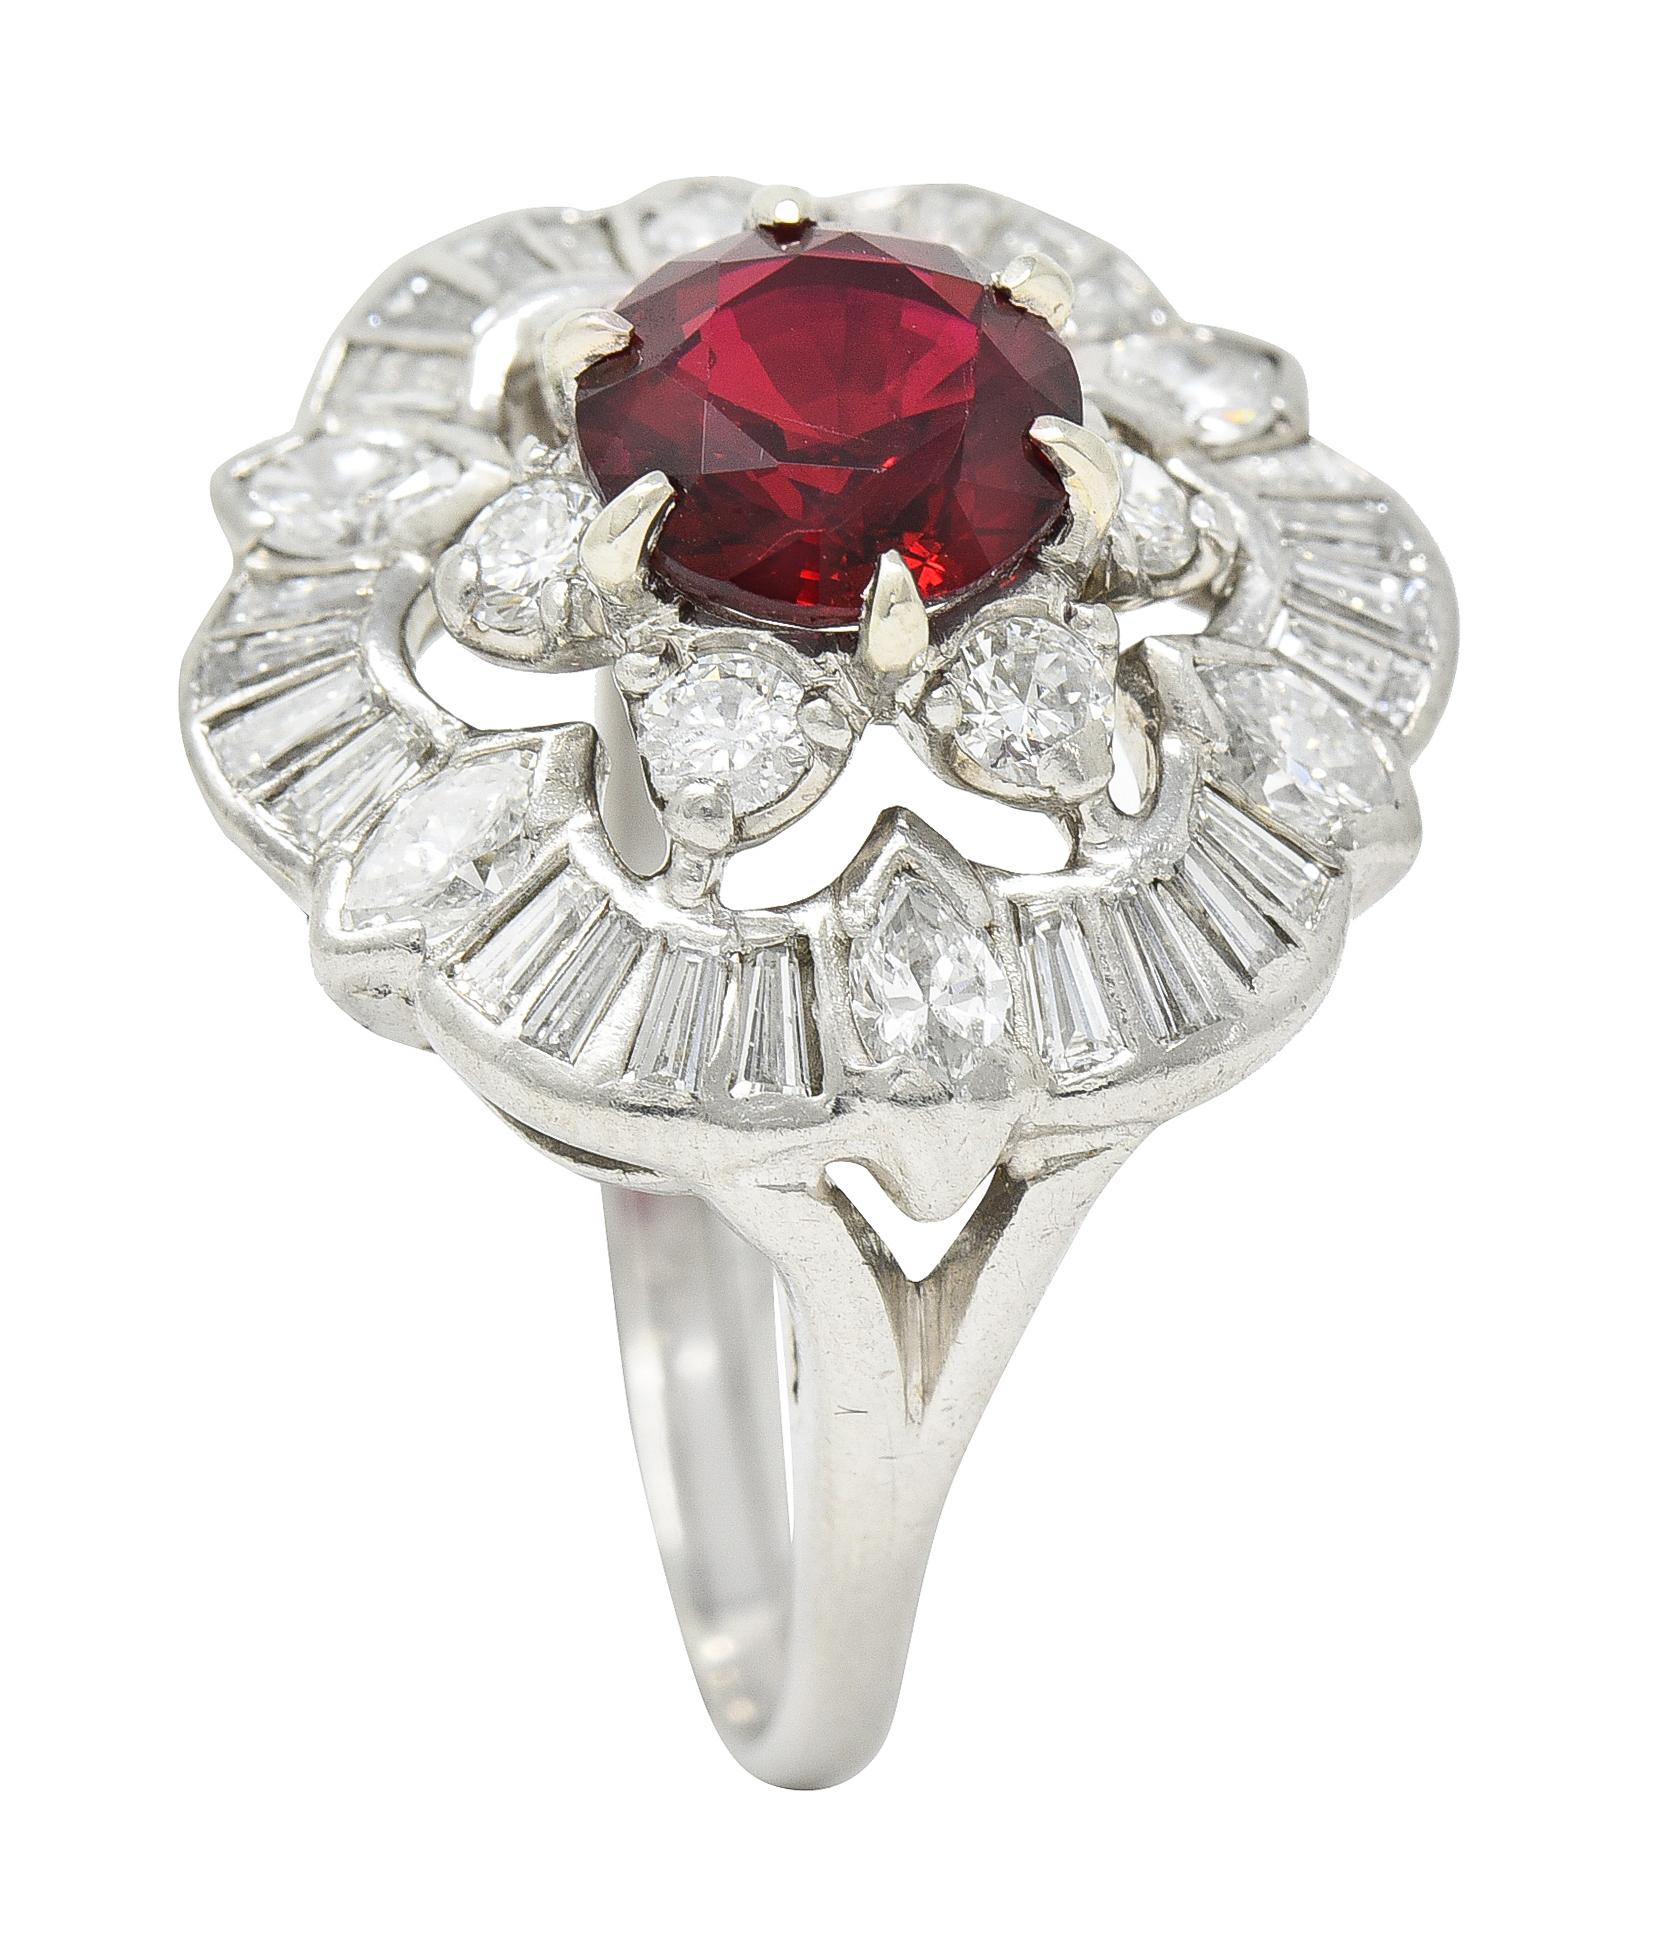 1950's Mid-Century 2.77 Carats Red Spinel Diamond Platinum Cluster Cocktail Ring For Sale 8